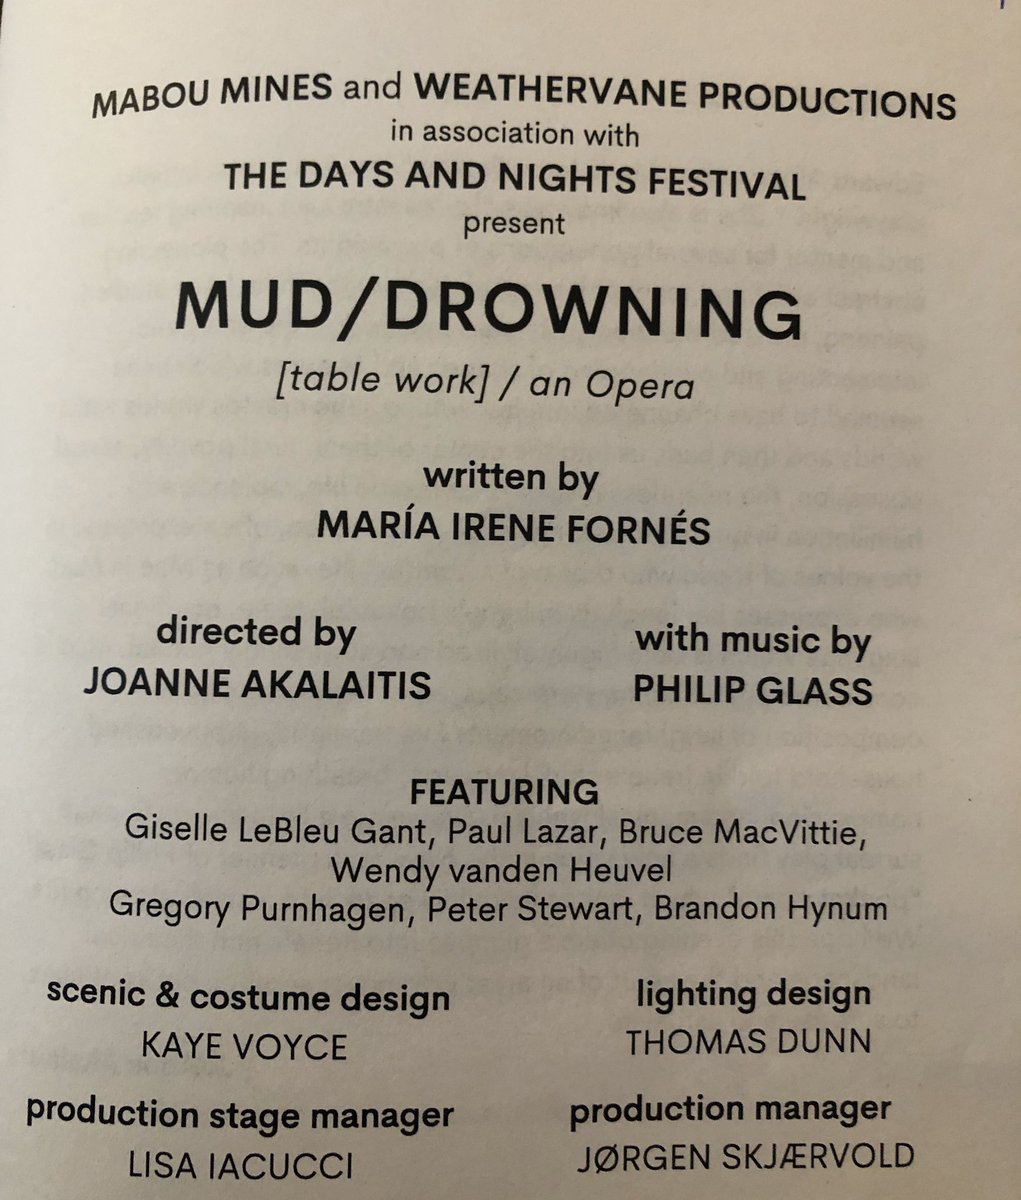 The Mabou Mines production of María Irene Fornés’ MUD/DROWNING filled me with such warm nostalgia for a downtown theatre that I’m pretty sure doesnt exist anymore. Just the names on the program alone! The back slashes!